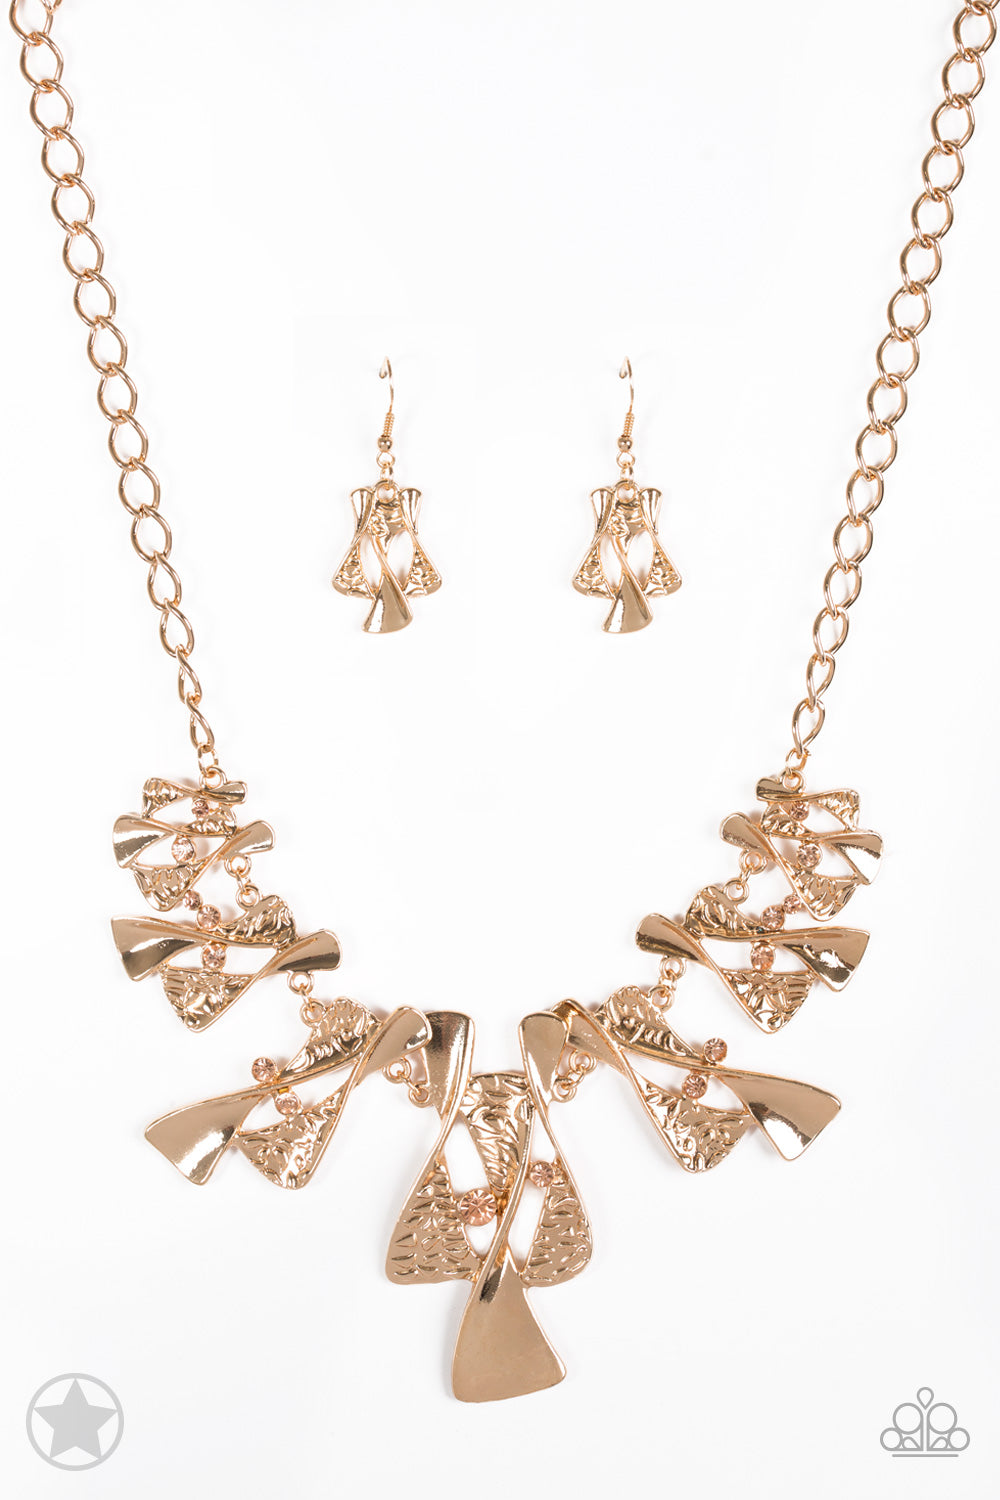 Paparazzi Accessories The Sands Of Time - Gold Blockbuster Necklaces - Lady T Accessories